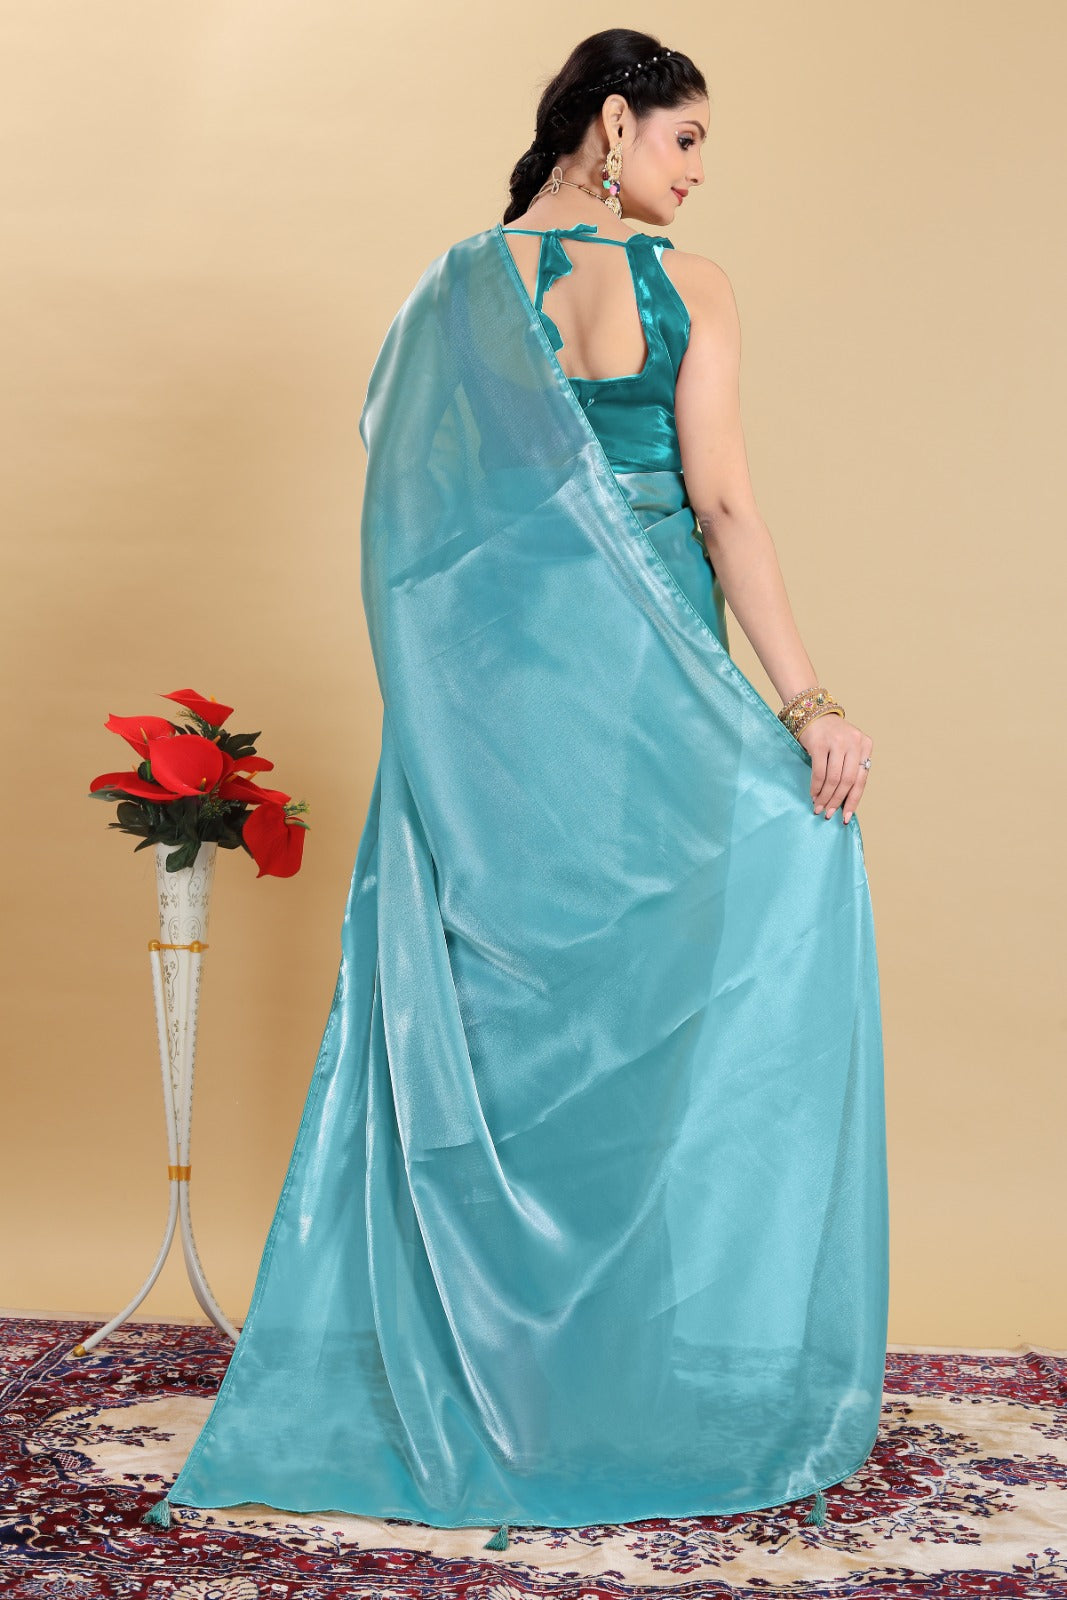 "Exquisite Pure Jimmy Choo Saree with Intricate Embellishments and Stitched Blouse Set"